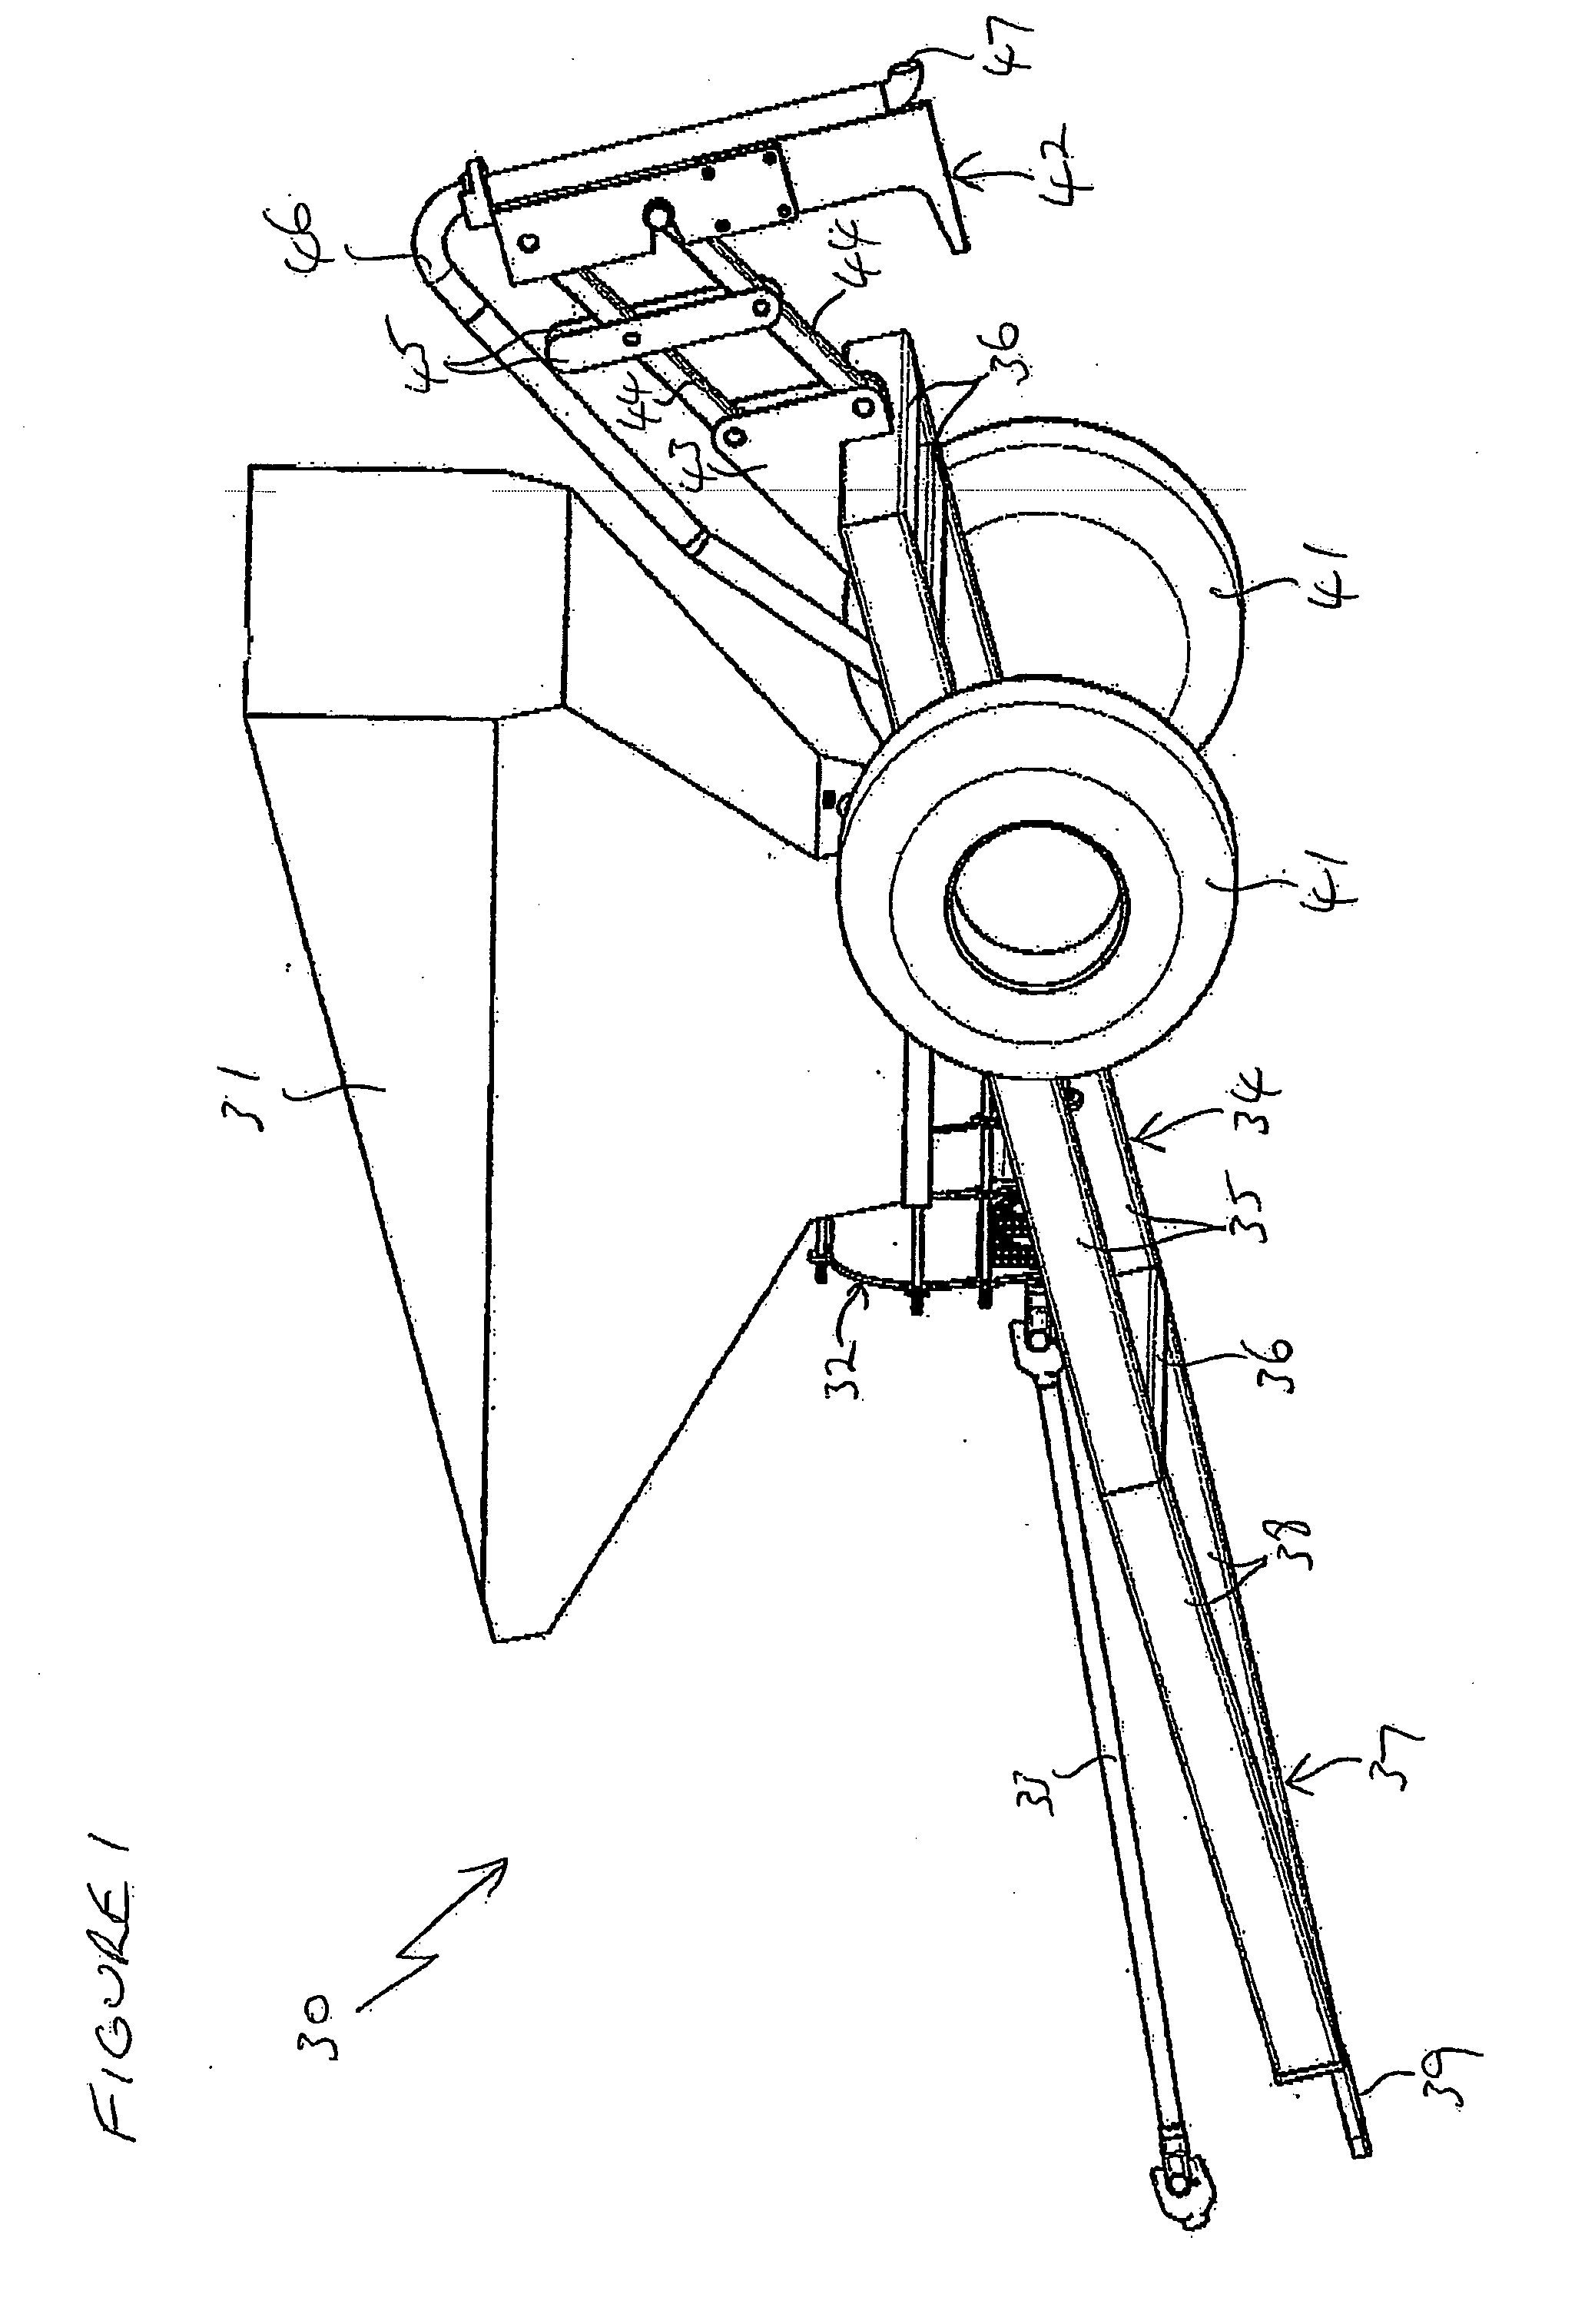 Method and Apparatus for Applying Matter to a Field